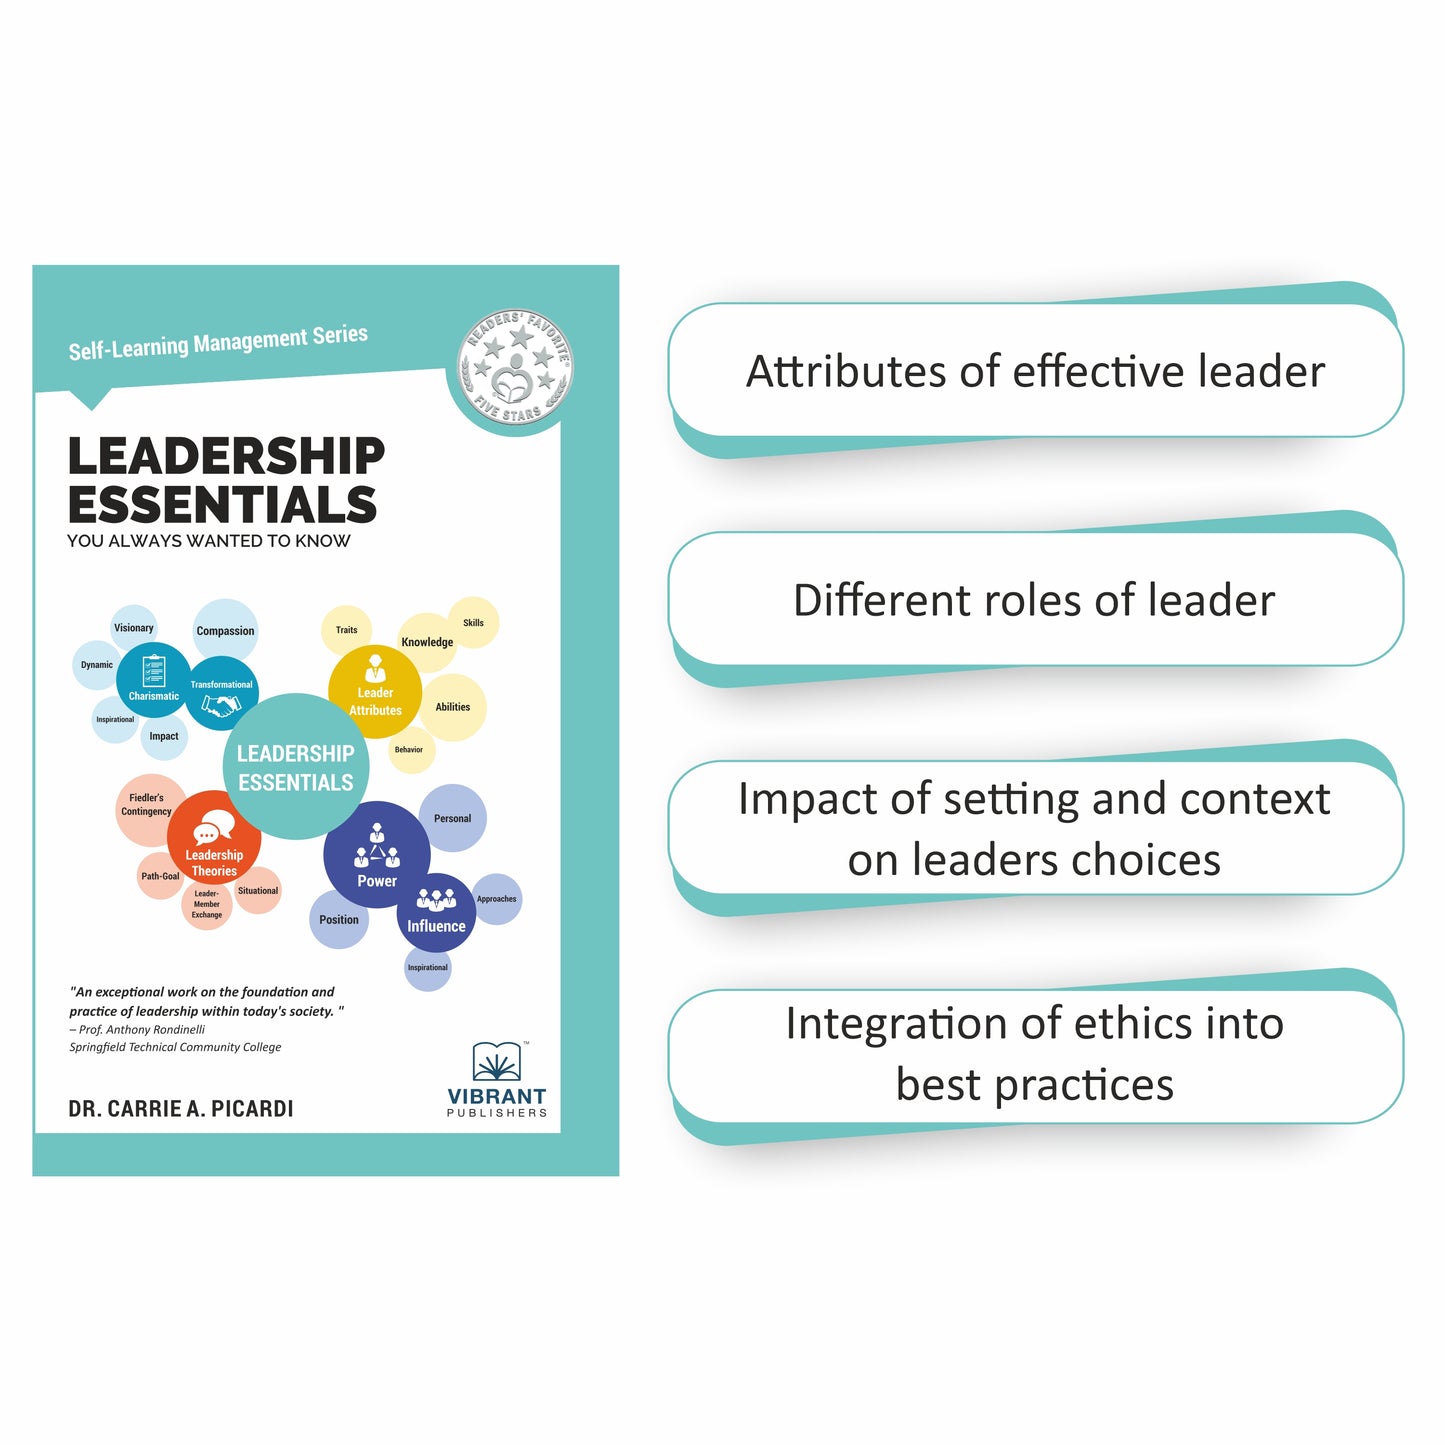 Management Essentials for Business Leaders and Professionals - Includes books for planning, managing and leading a business successfully